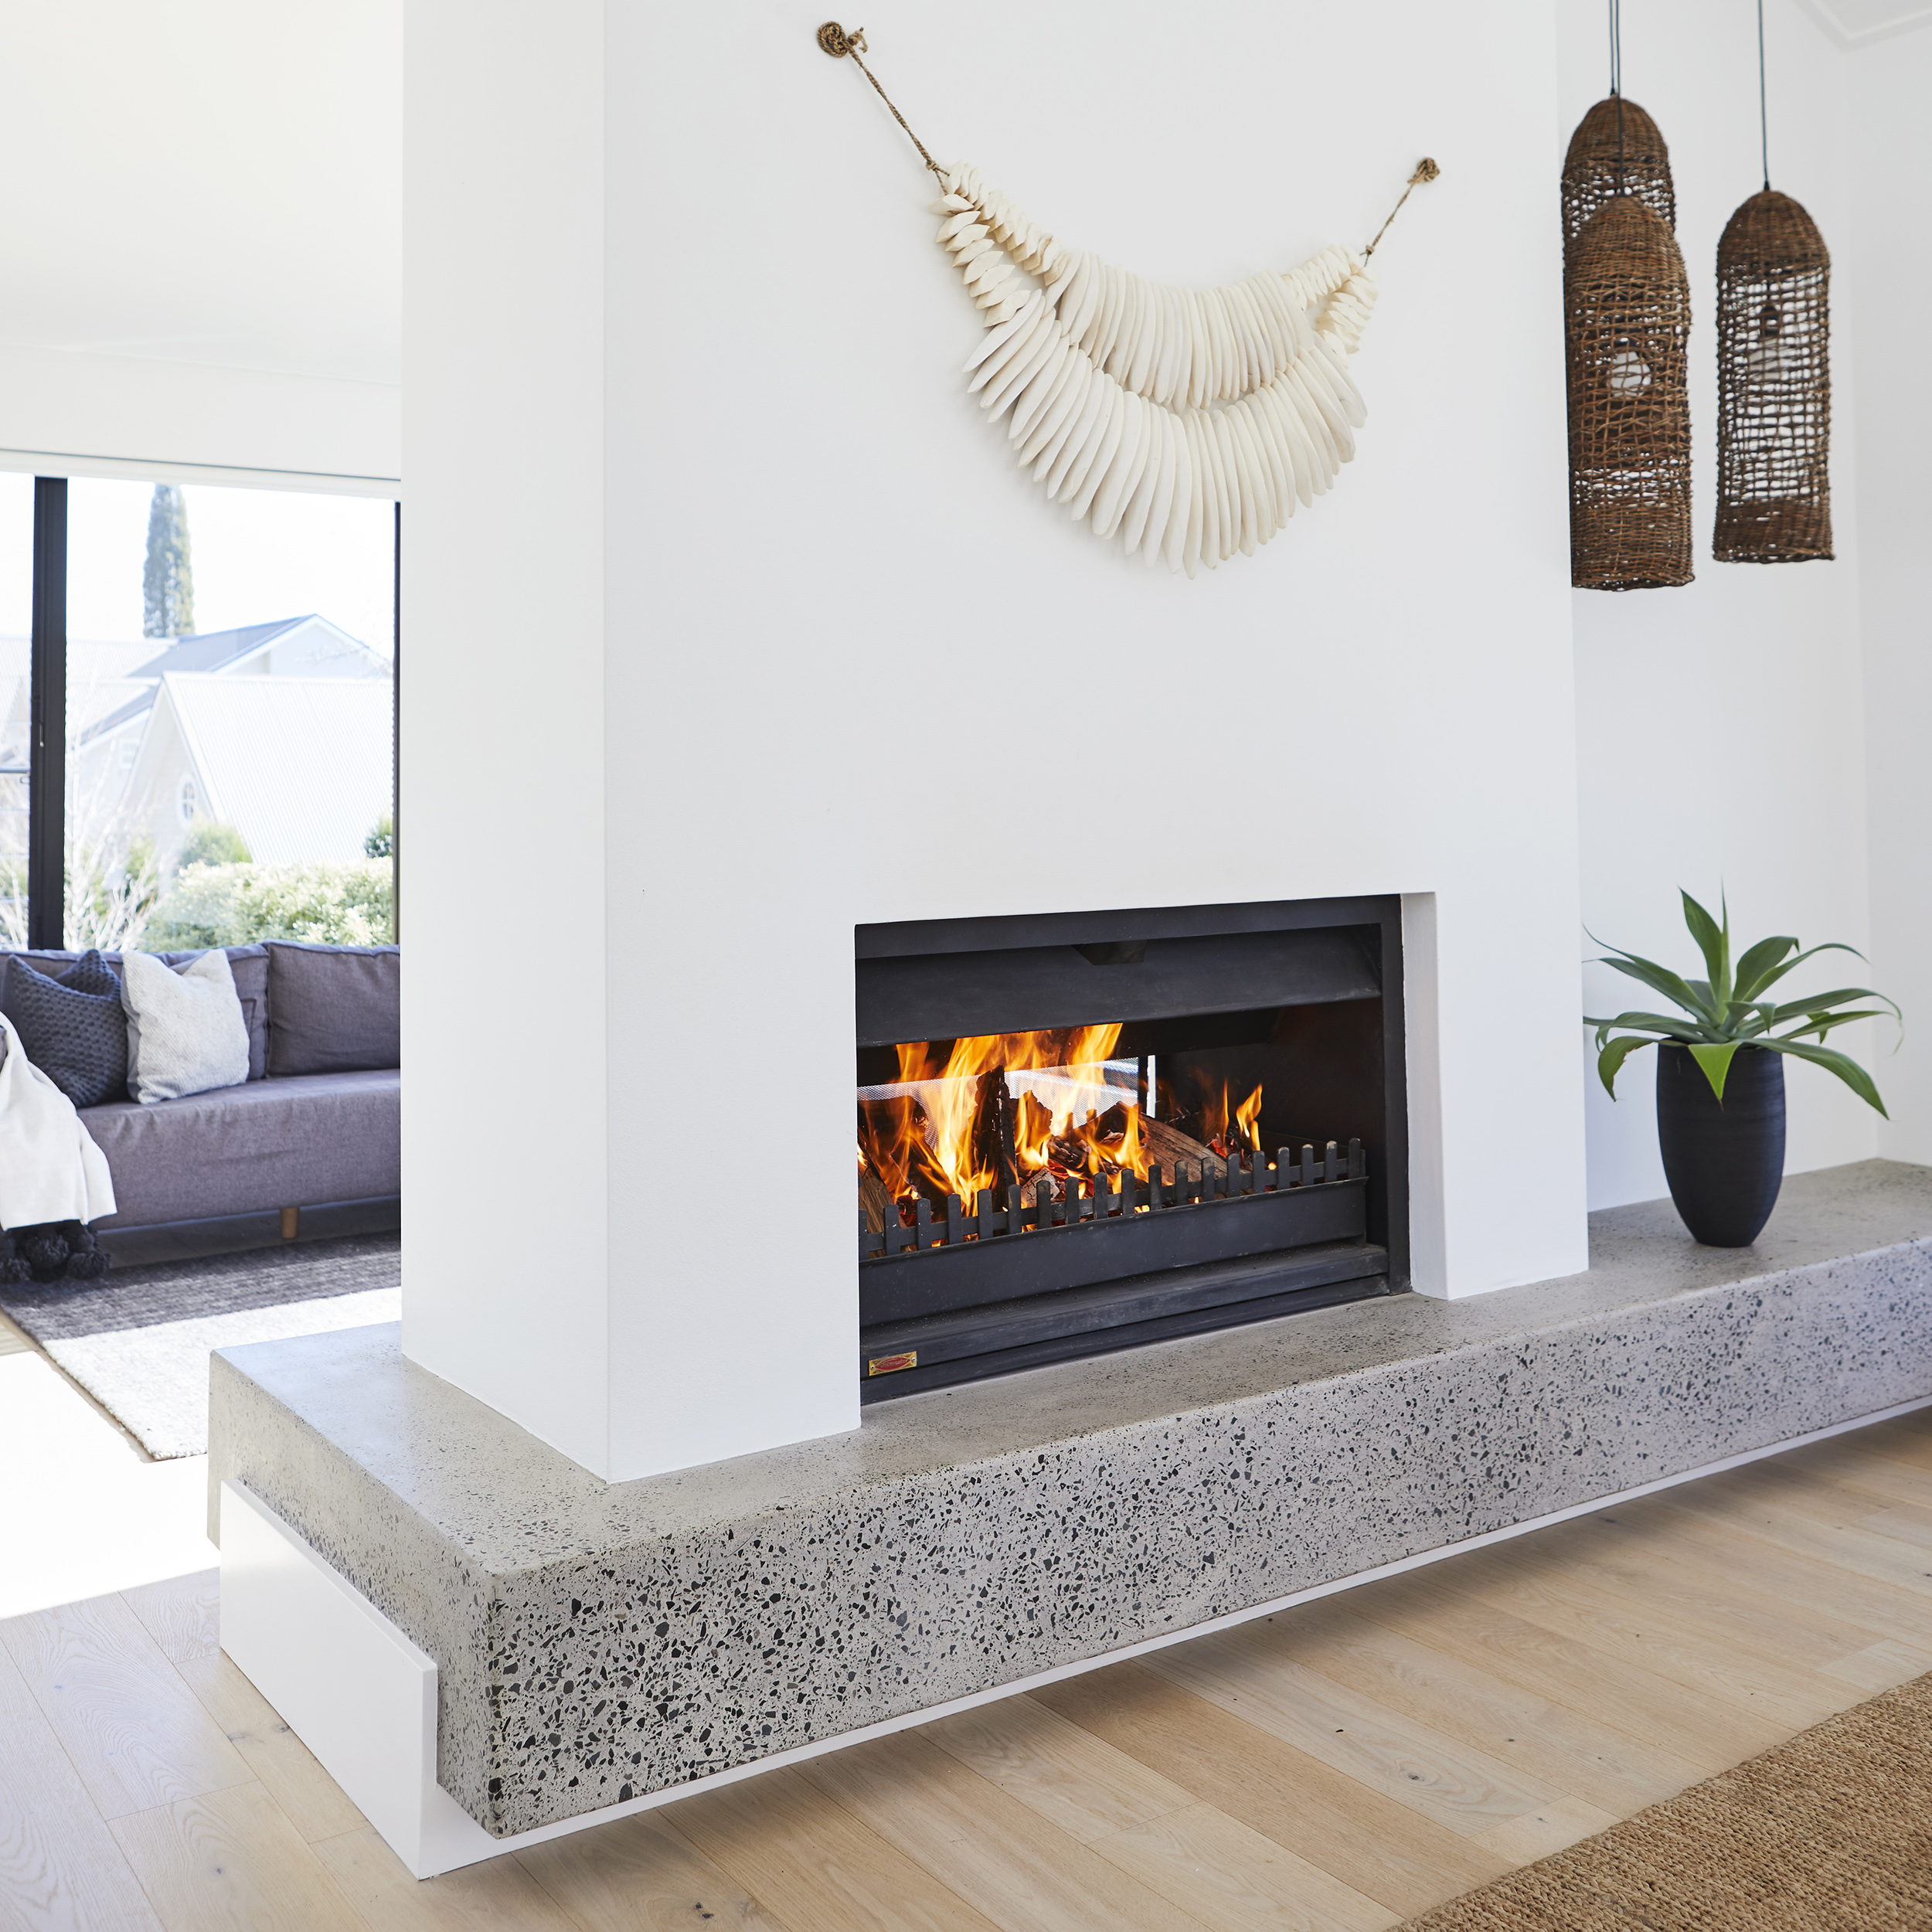 Double Sided Fireplaces That Make Your Home Cozy And Modern